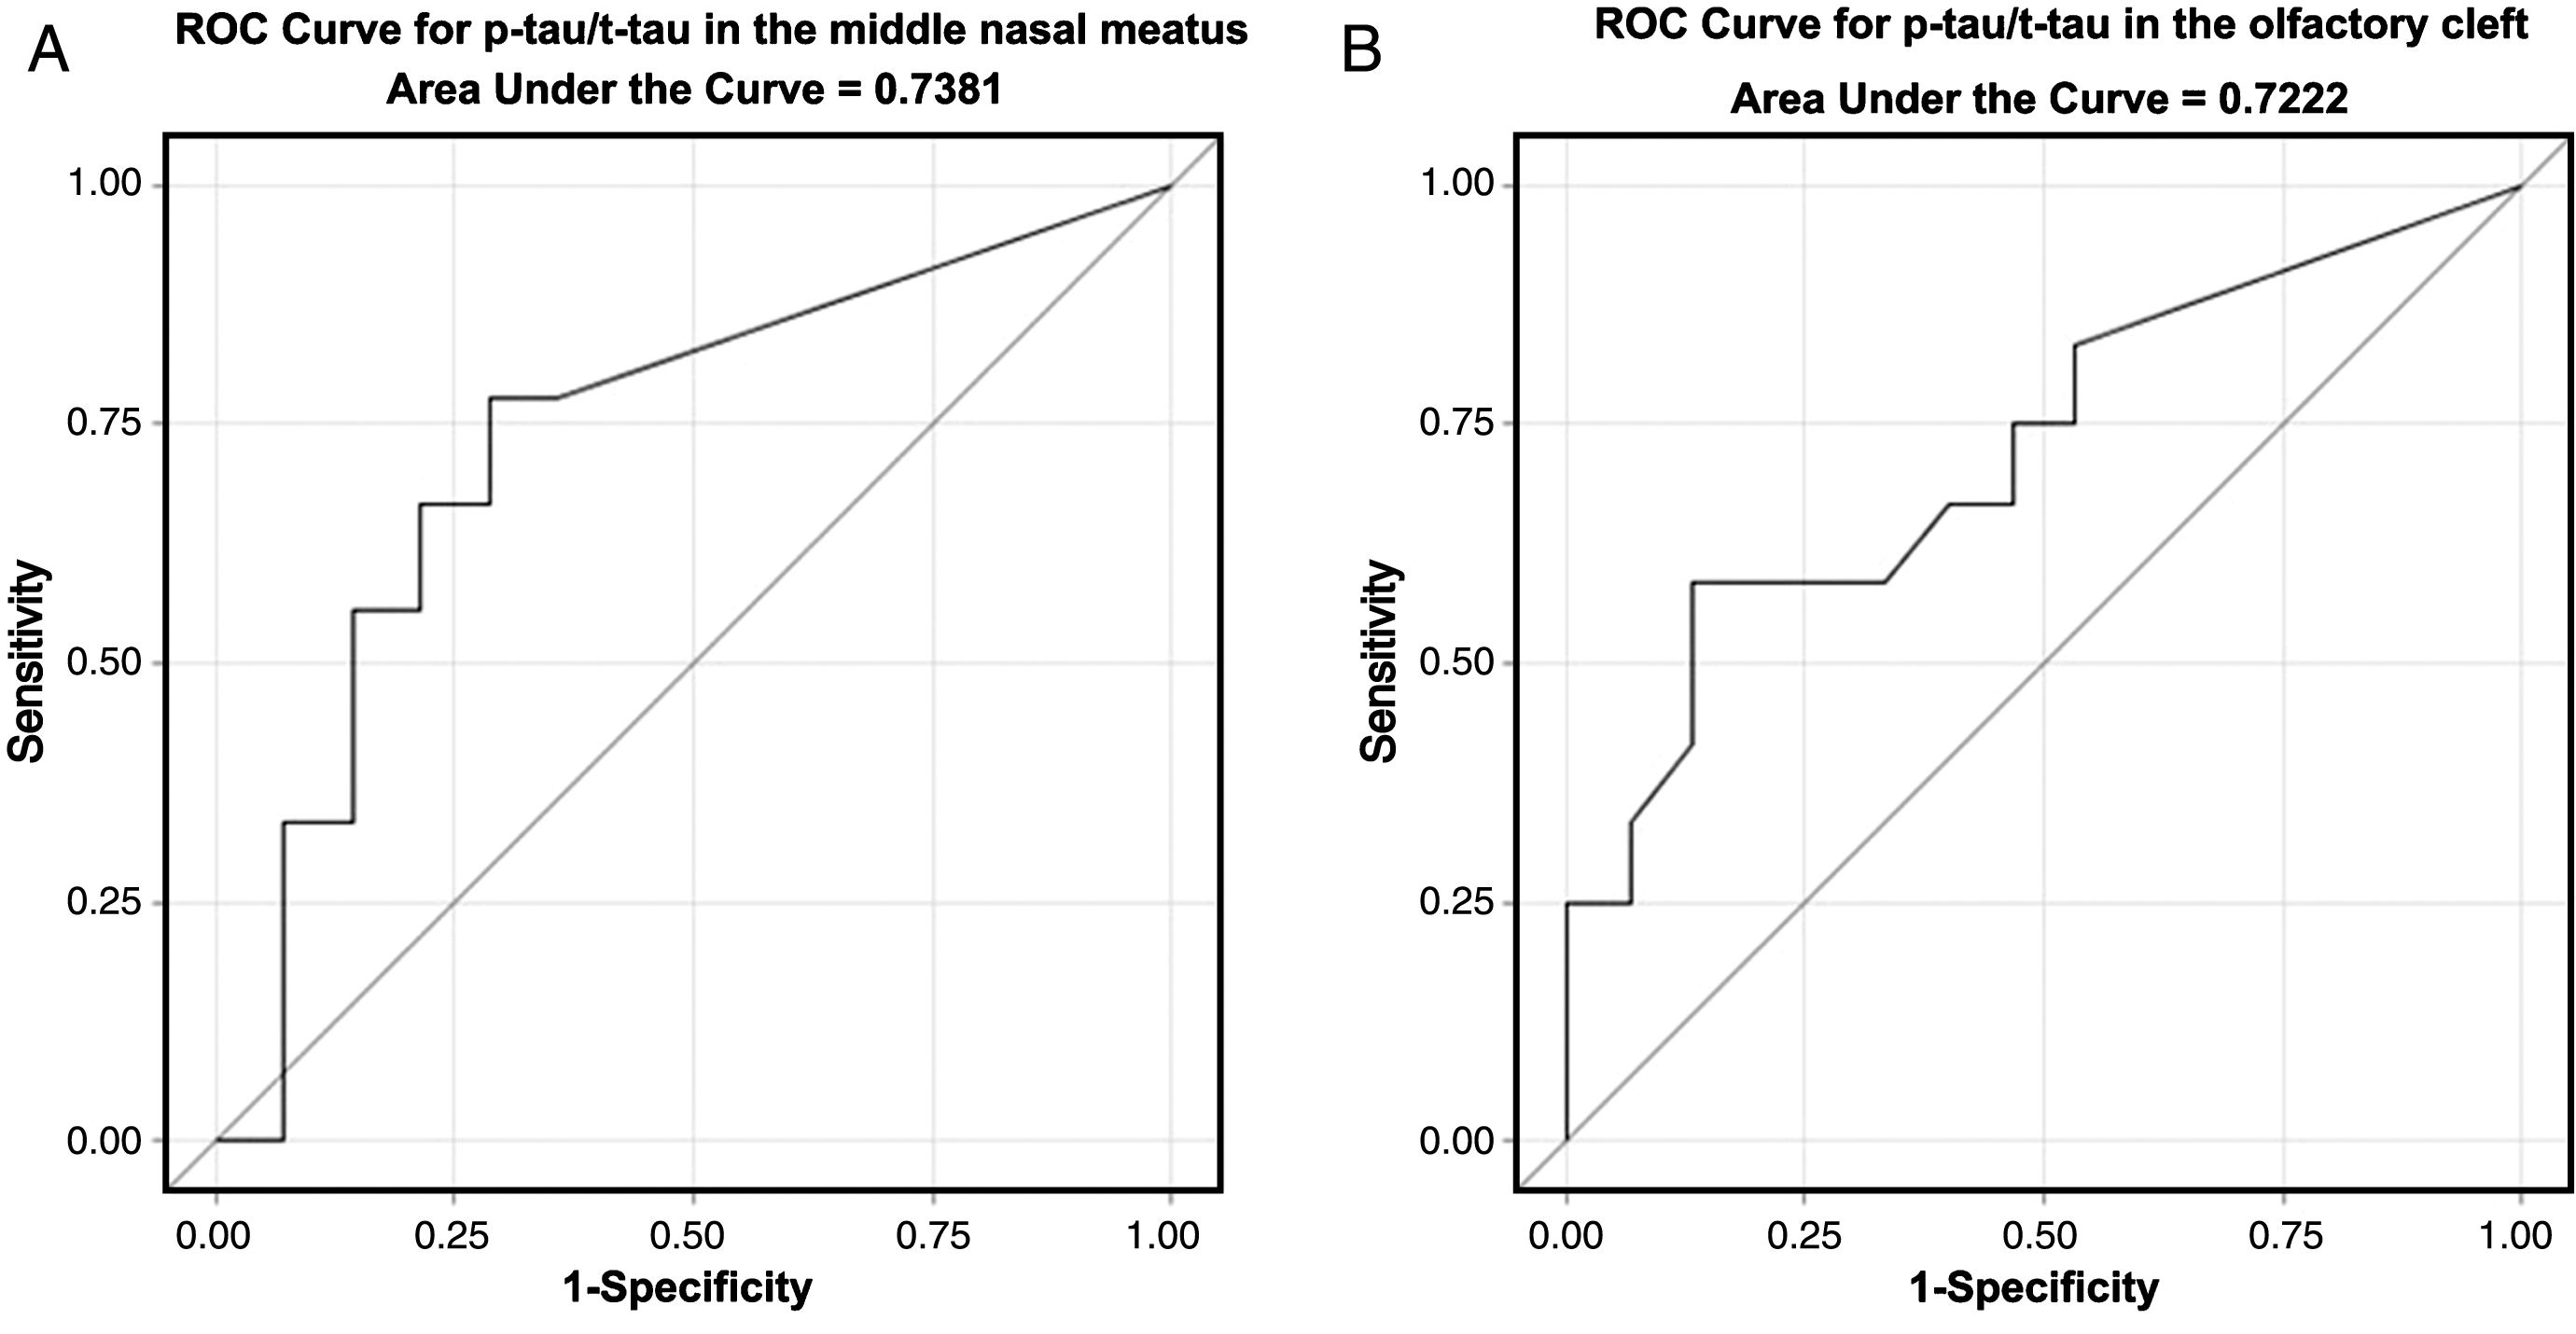 Receiver operating characteristic (ROC) curves for p-tau/t-tau in (A) the middle nasal meatus and (B) the olfactory cleft, for predicting AD. The area under the curve (AUC) is 0.738, 95% Confidence Limits (95% CL) = 0.523–0.953, p = 0.030 for A and 0.722, 95% CL = 0.523–0.921, p = 0.029 for B.